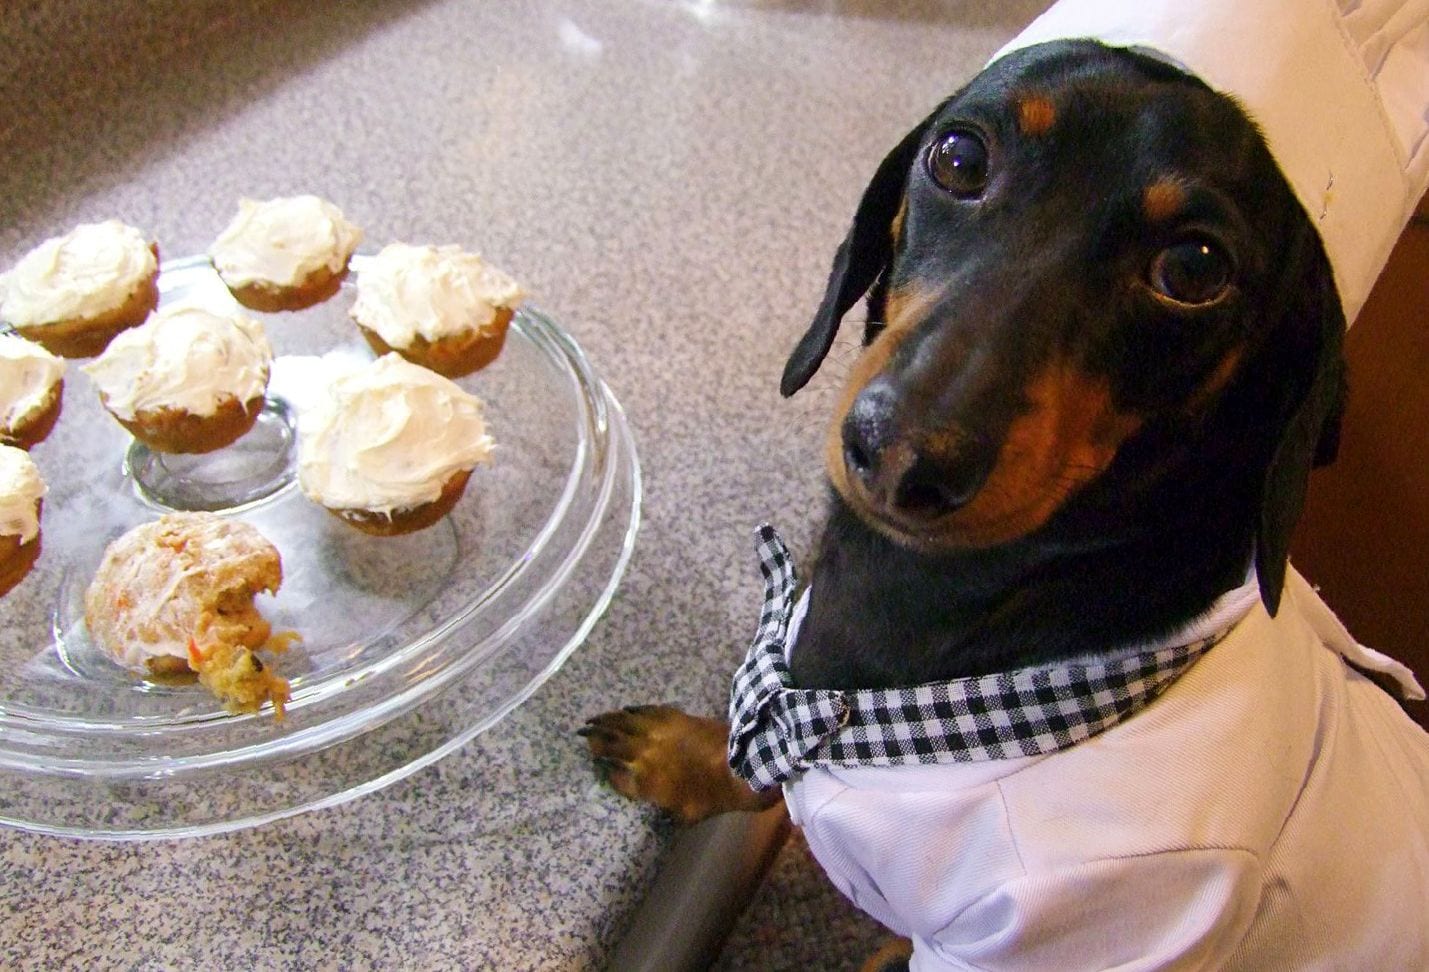 A Dachshund in its chef outfit standing by the counter with cupcakes in front of him